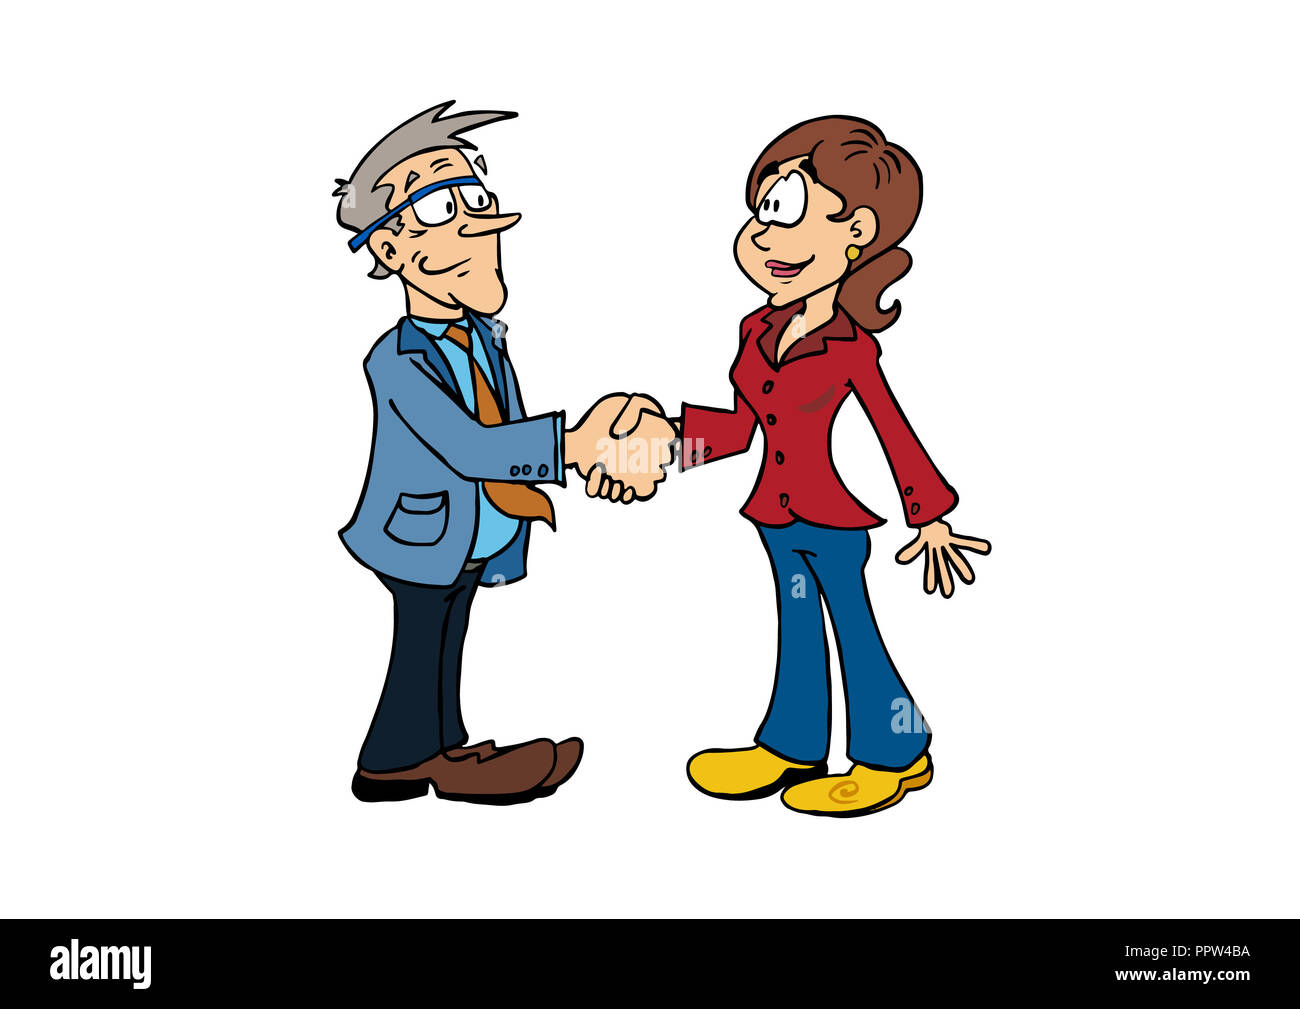 Handshake illustrations with characters Bertrand and Sophie. Cartoon ...